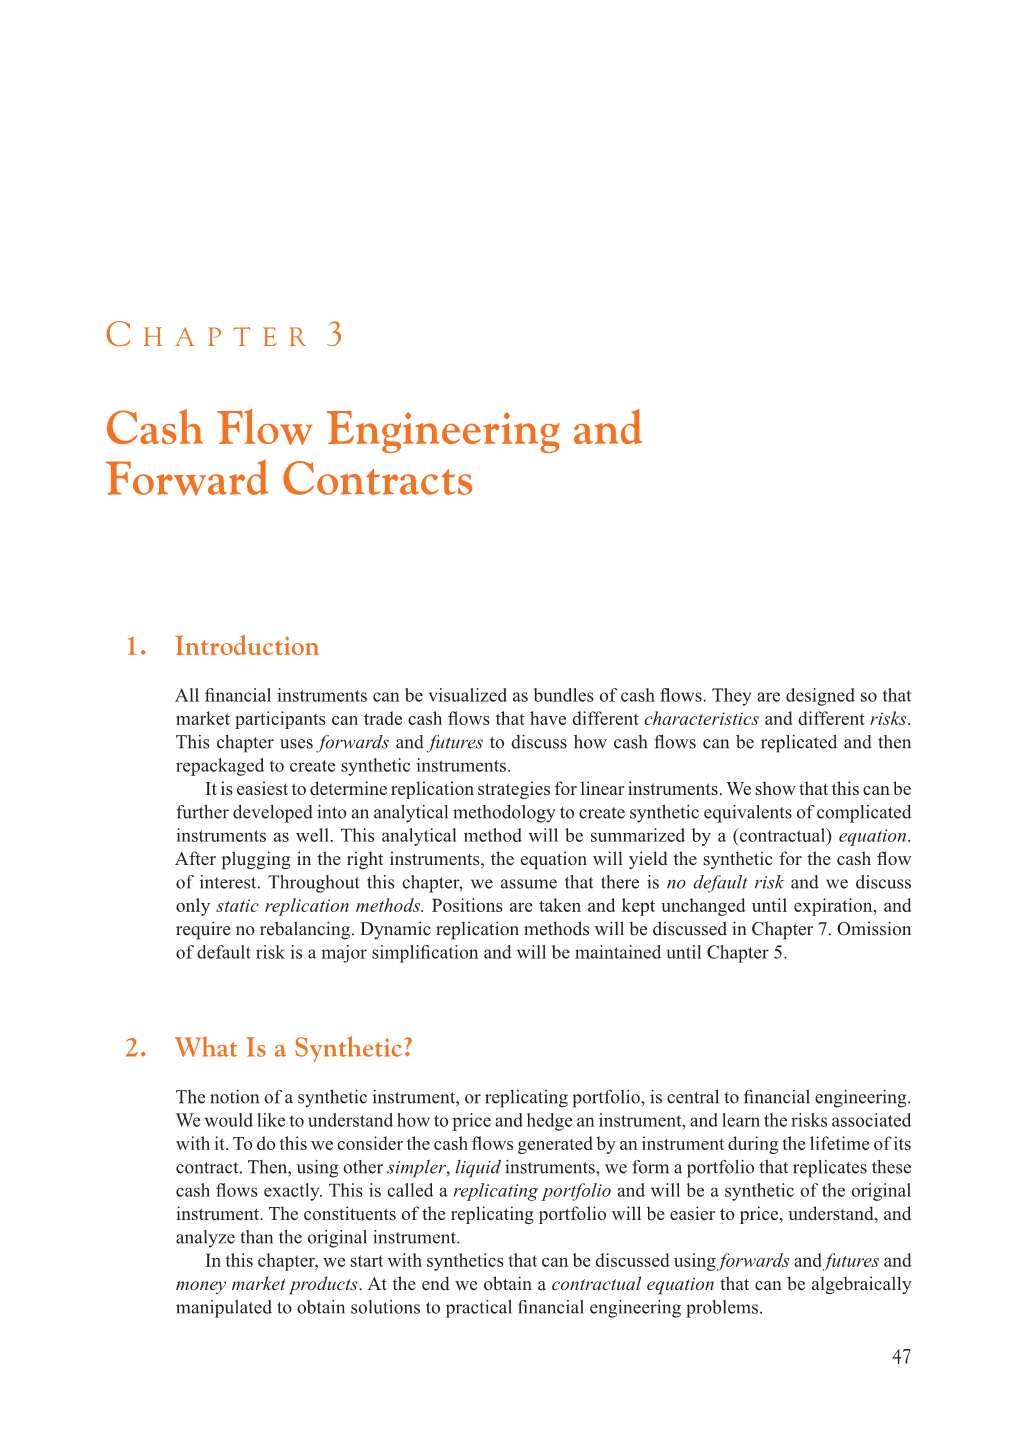 Cash Flow Engineering and Forward Contracts